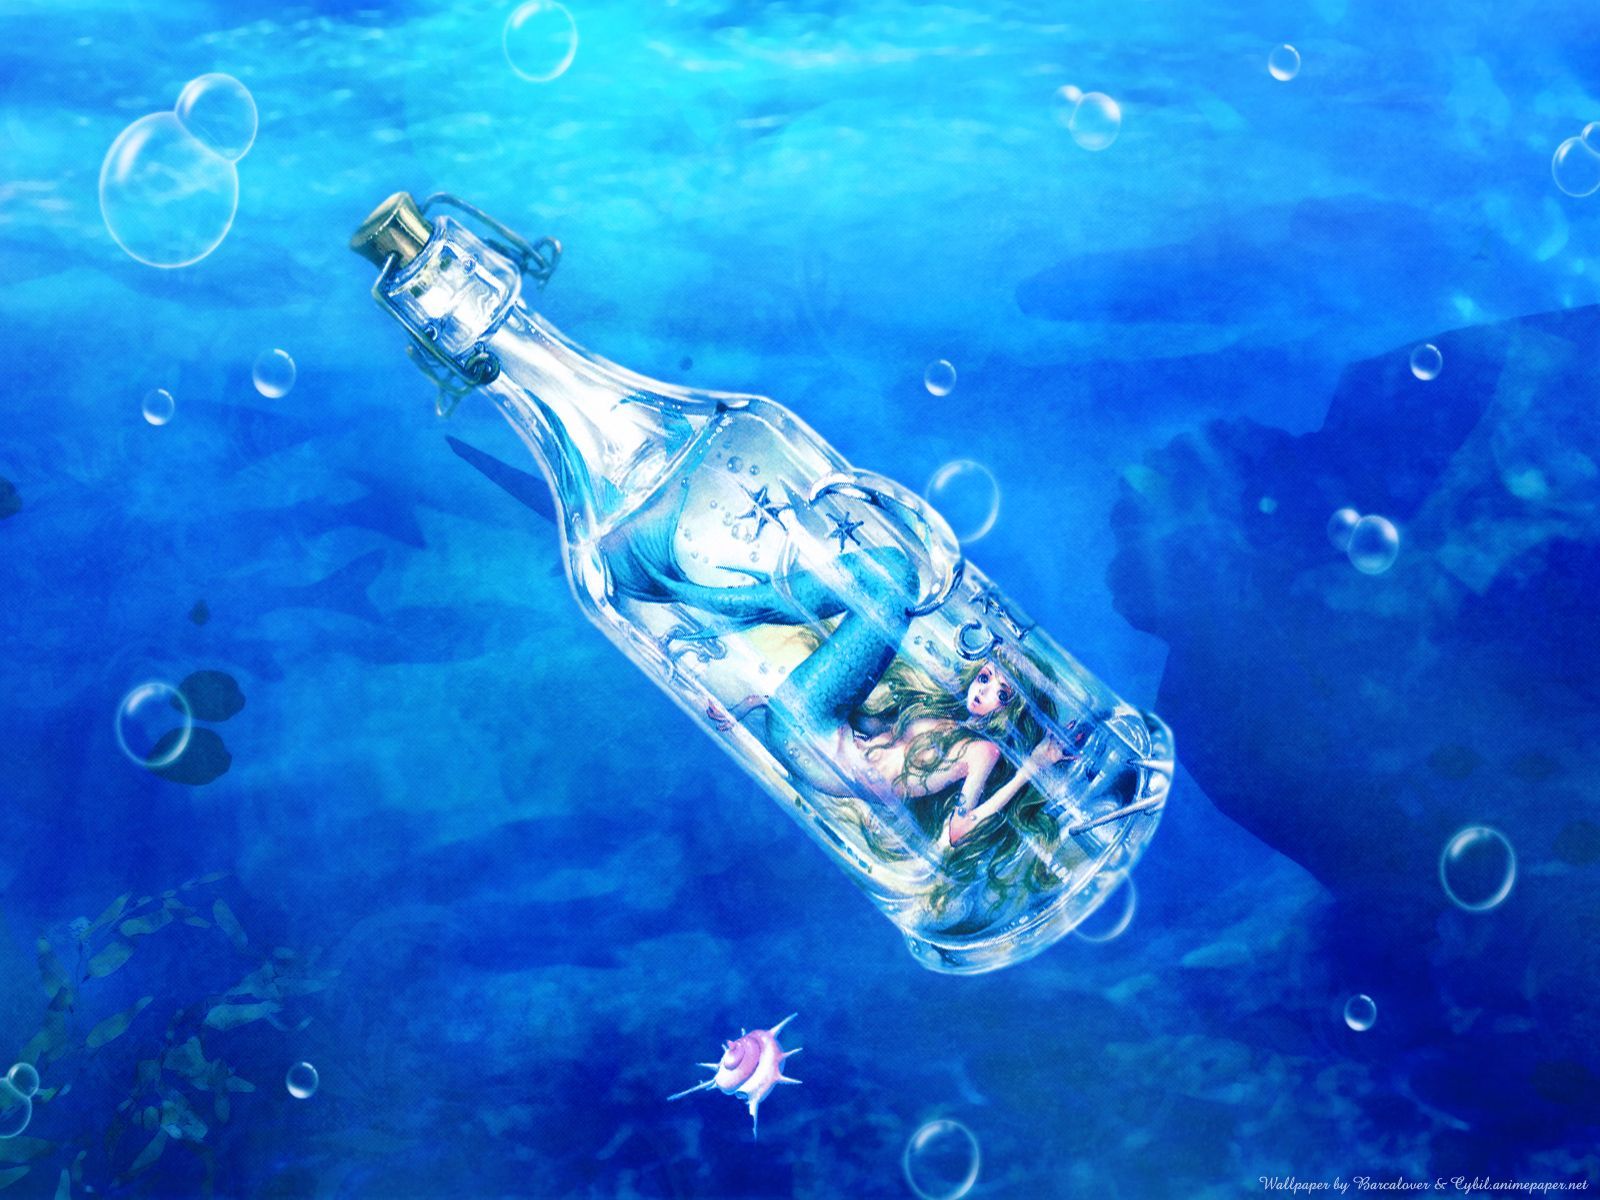 The Next Lovely Anime Wallpaper Shows A Blue Mermaid Of Tukiji Free Downloads. HD Wallpaper